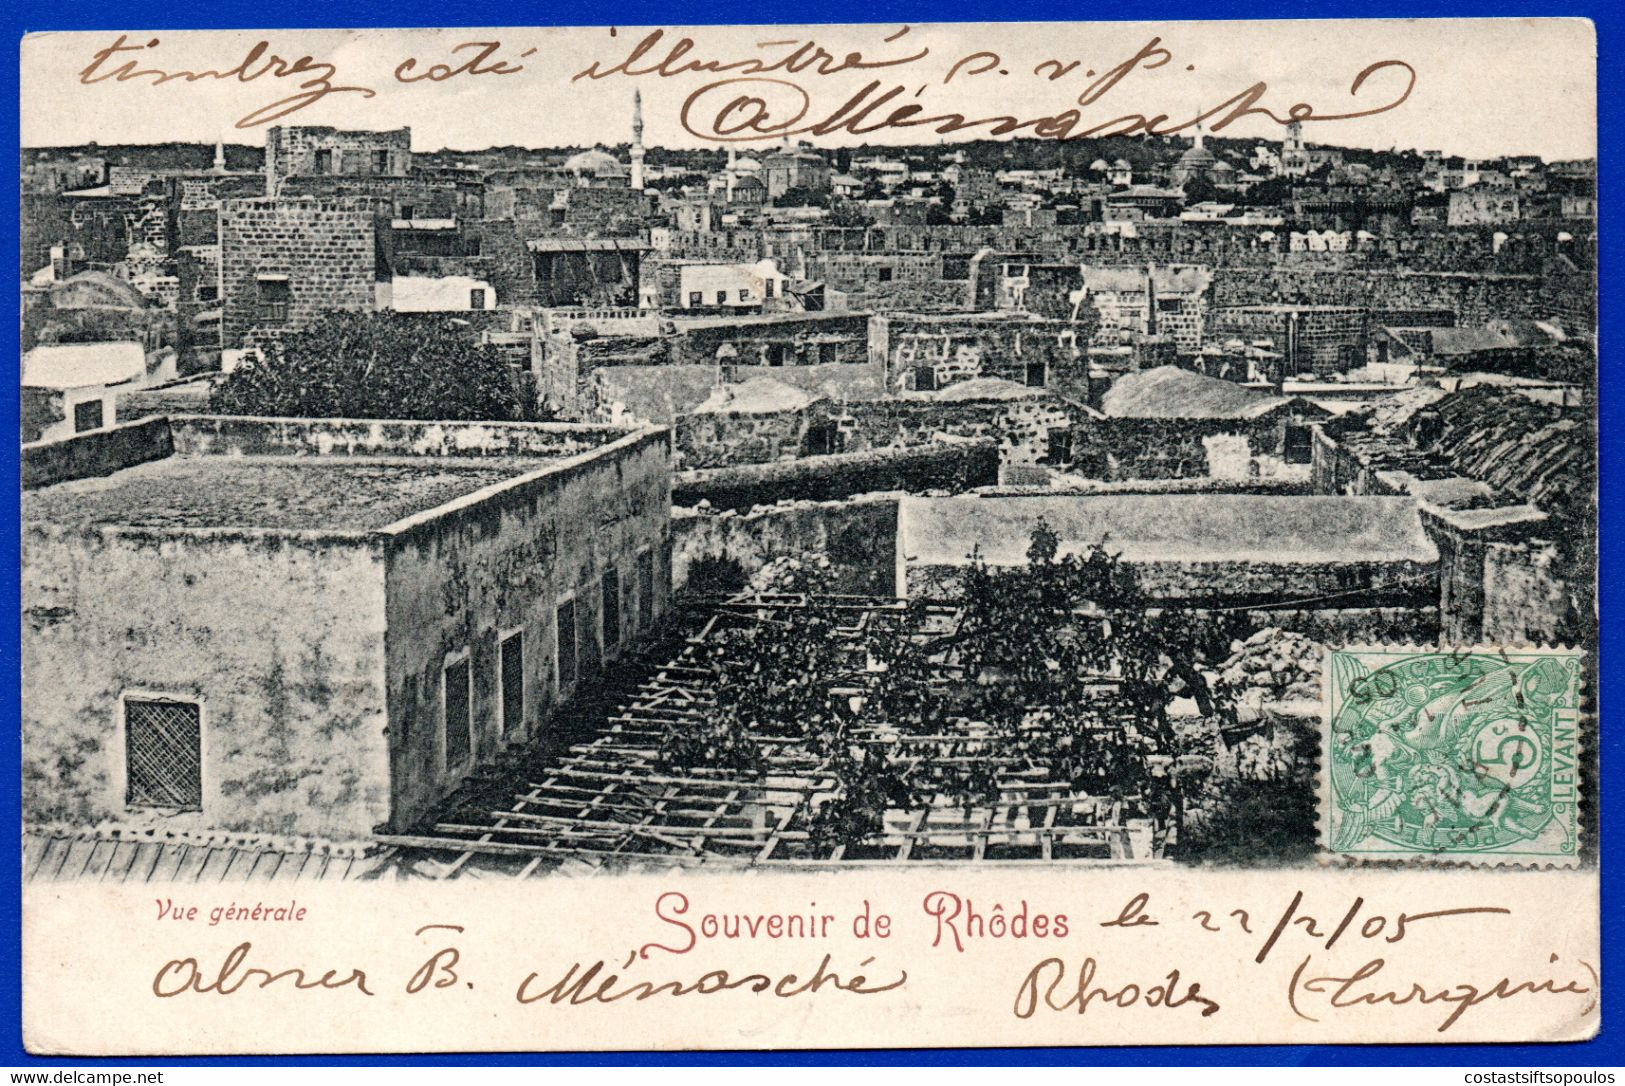 1403.GREECE, DODECANESE, FRANCE, LEVANT. 1905 REAL PHOTO POSTCARD FROM RHODES TO BELGIUM - Dodekanesos